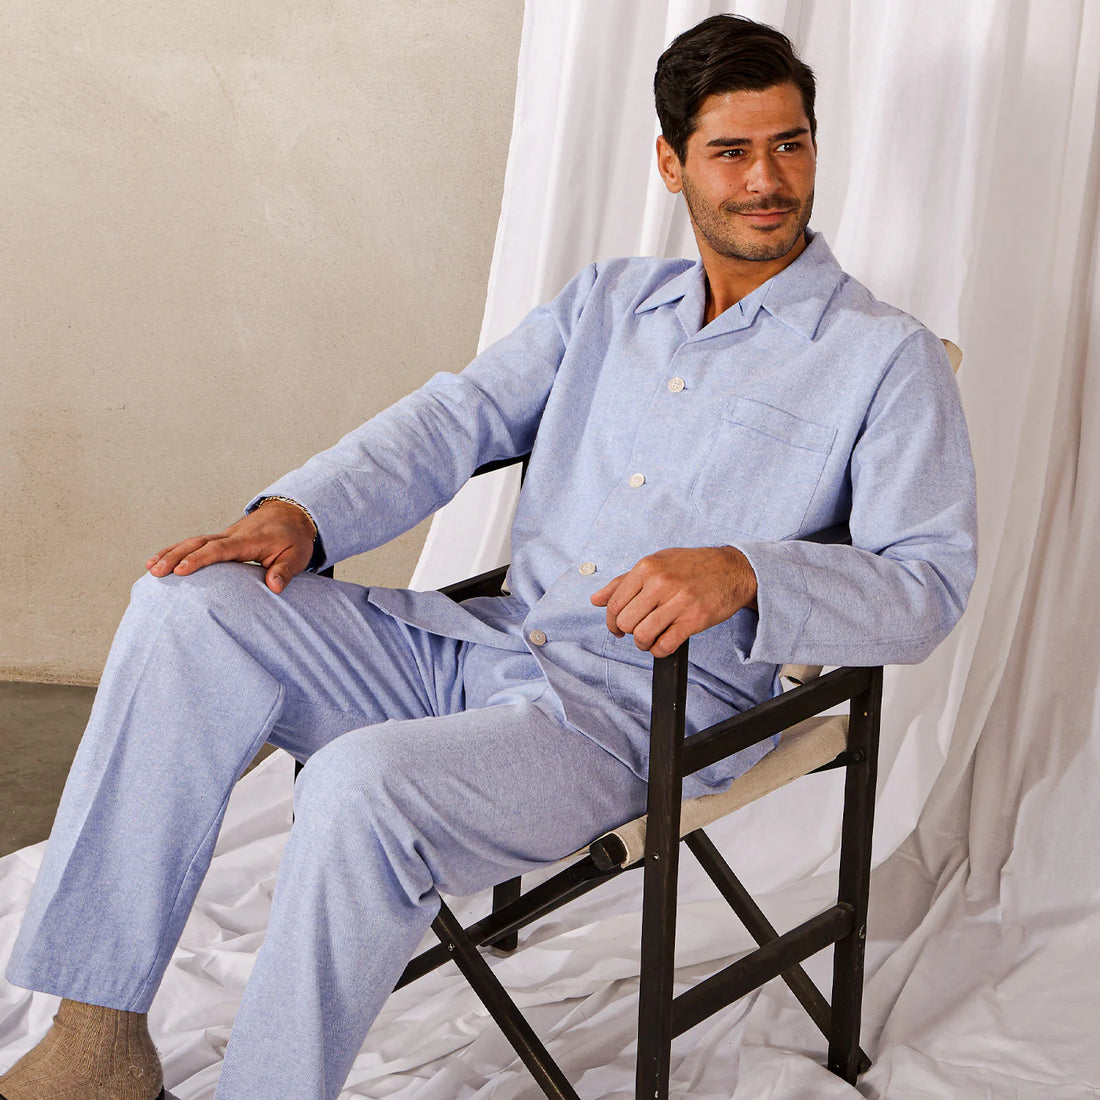 A man in a light blue pajama set sits relaxed on a black folding chair, with a white draped background.